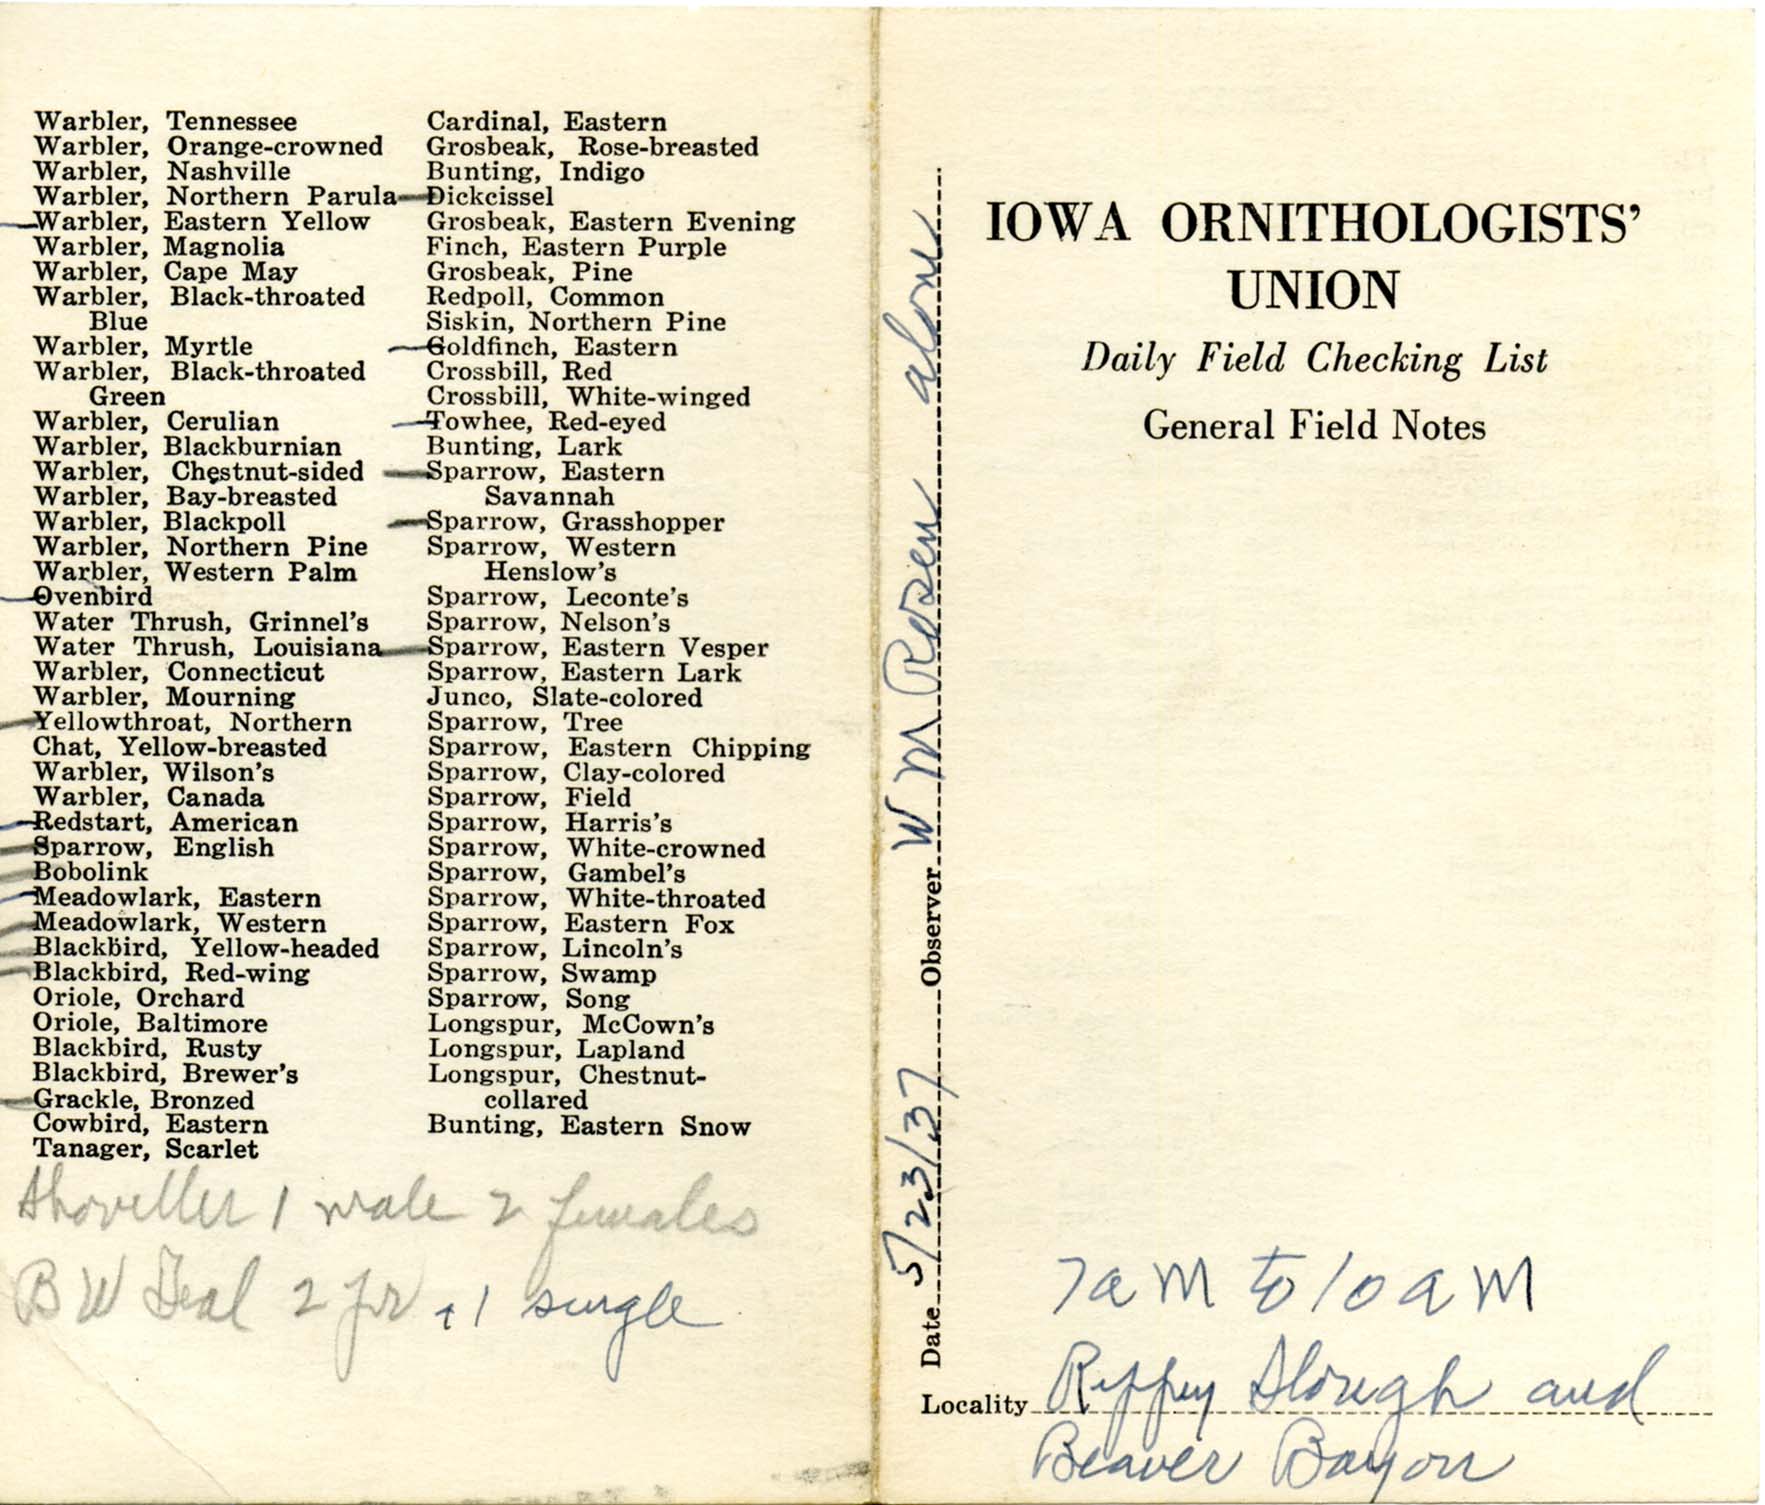 Daily field checking list by Walter Rosene, May 23, 1937